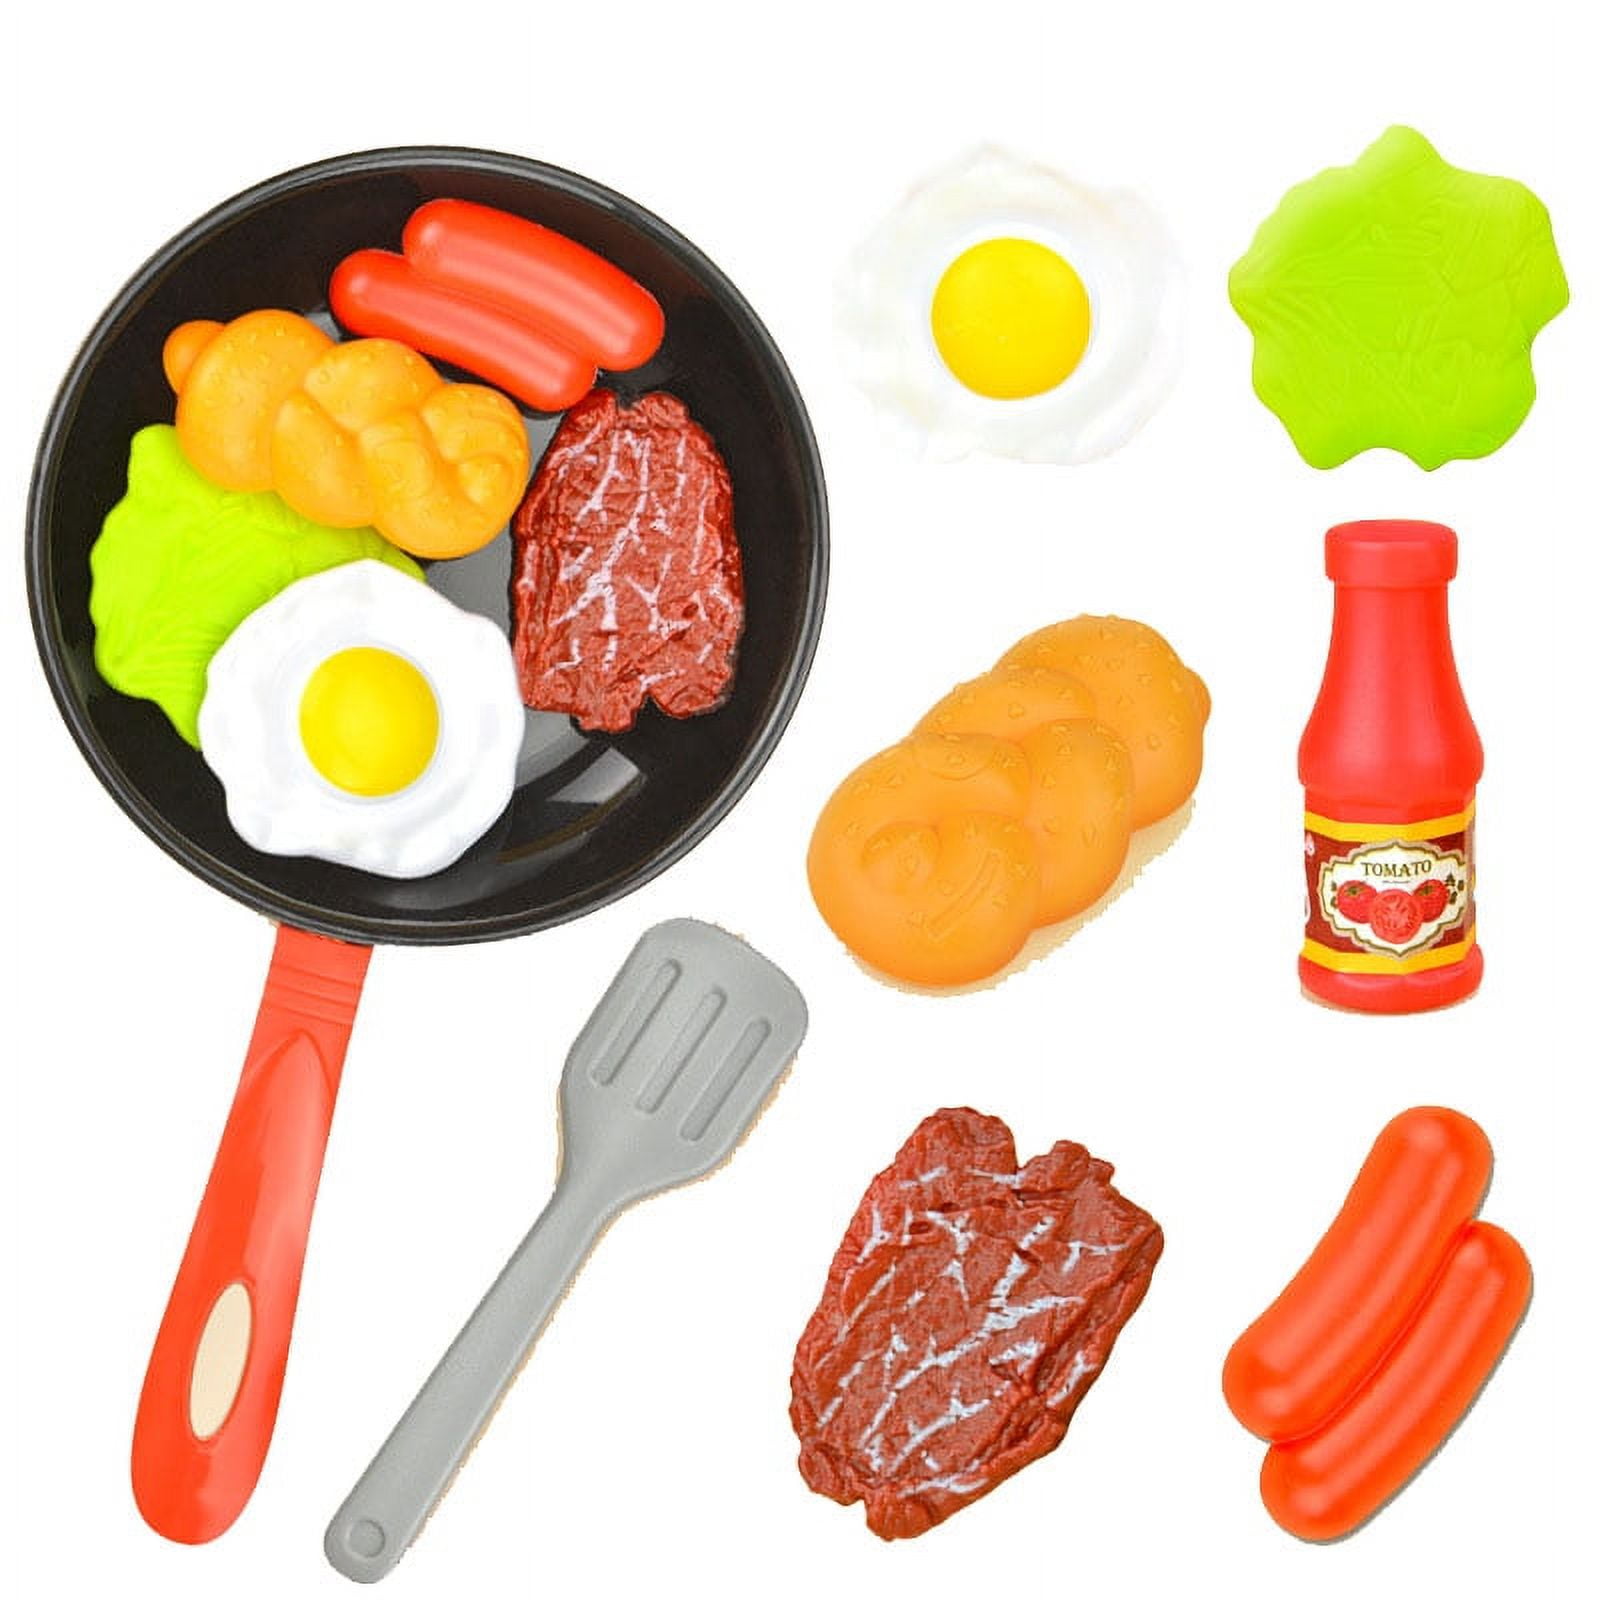 Fun Simulation Kitchen Toys Real Cooking Small Kitchen Utensils Kids  Cooking Interest Development Educational Puzzle Toys